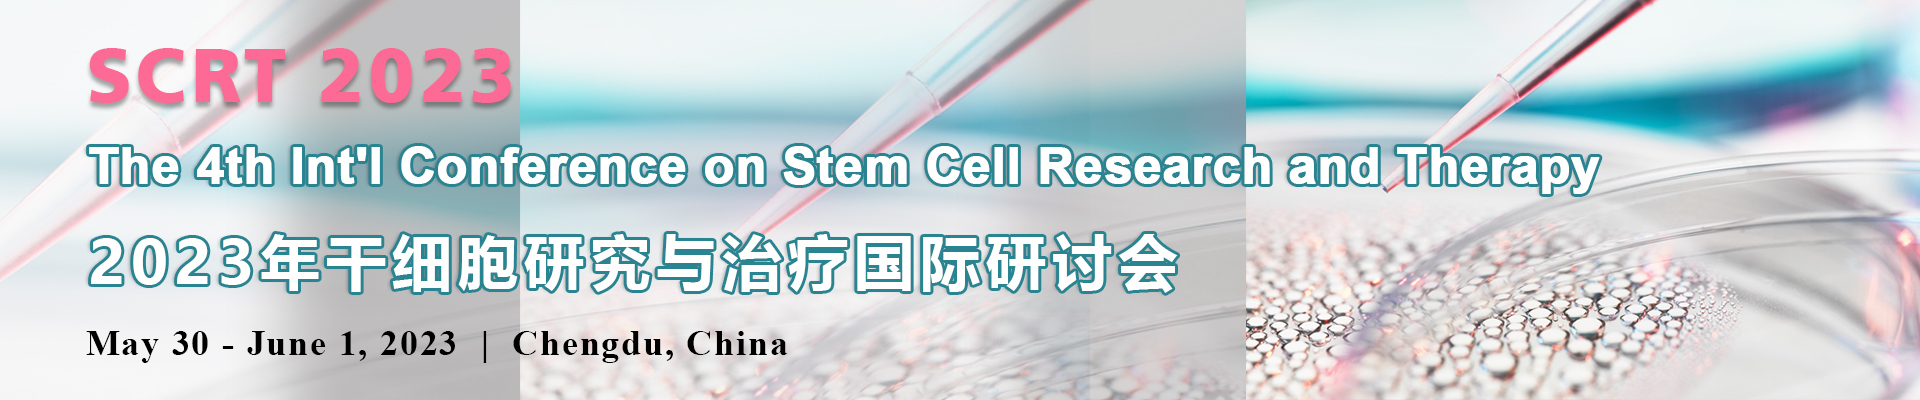 The 4th Int'l Conference on Stem Cell Research and Therapy (SCRT 2023), Chengdu, Sichuan, China